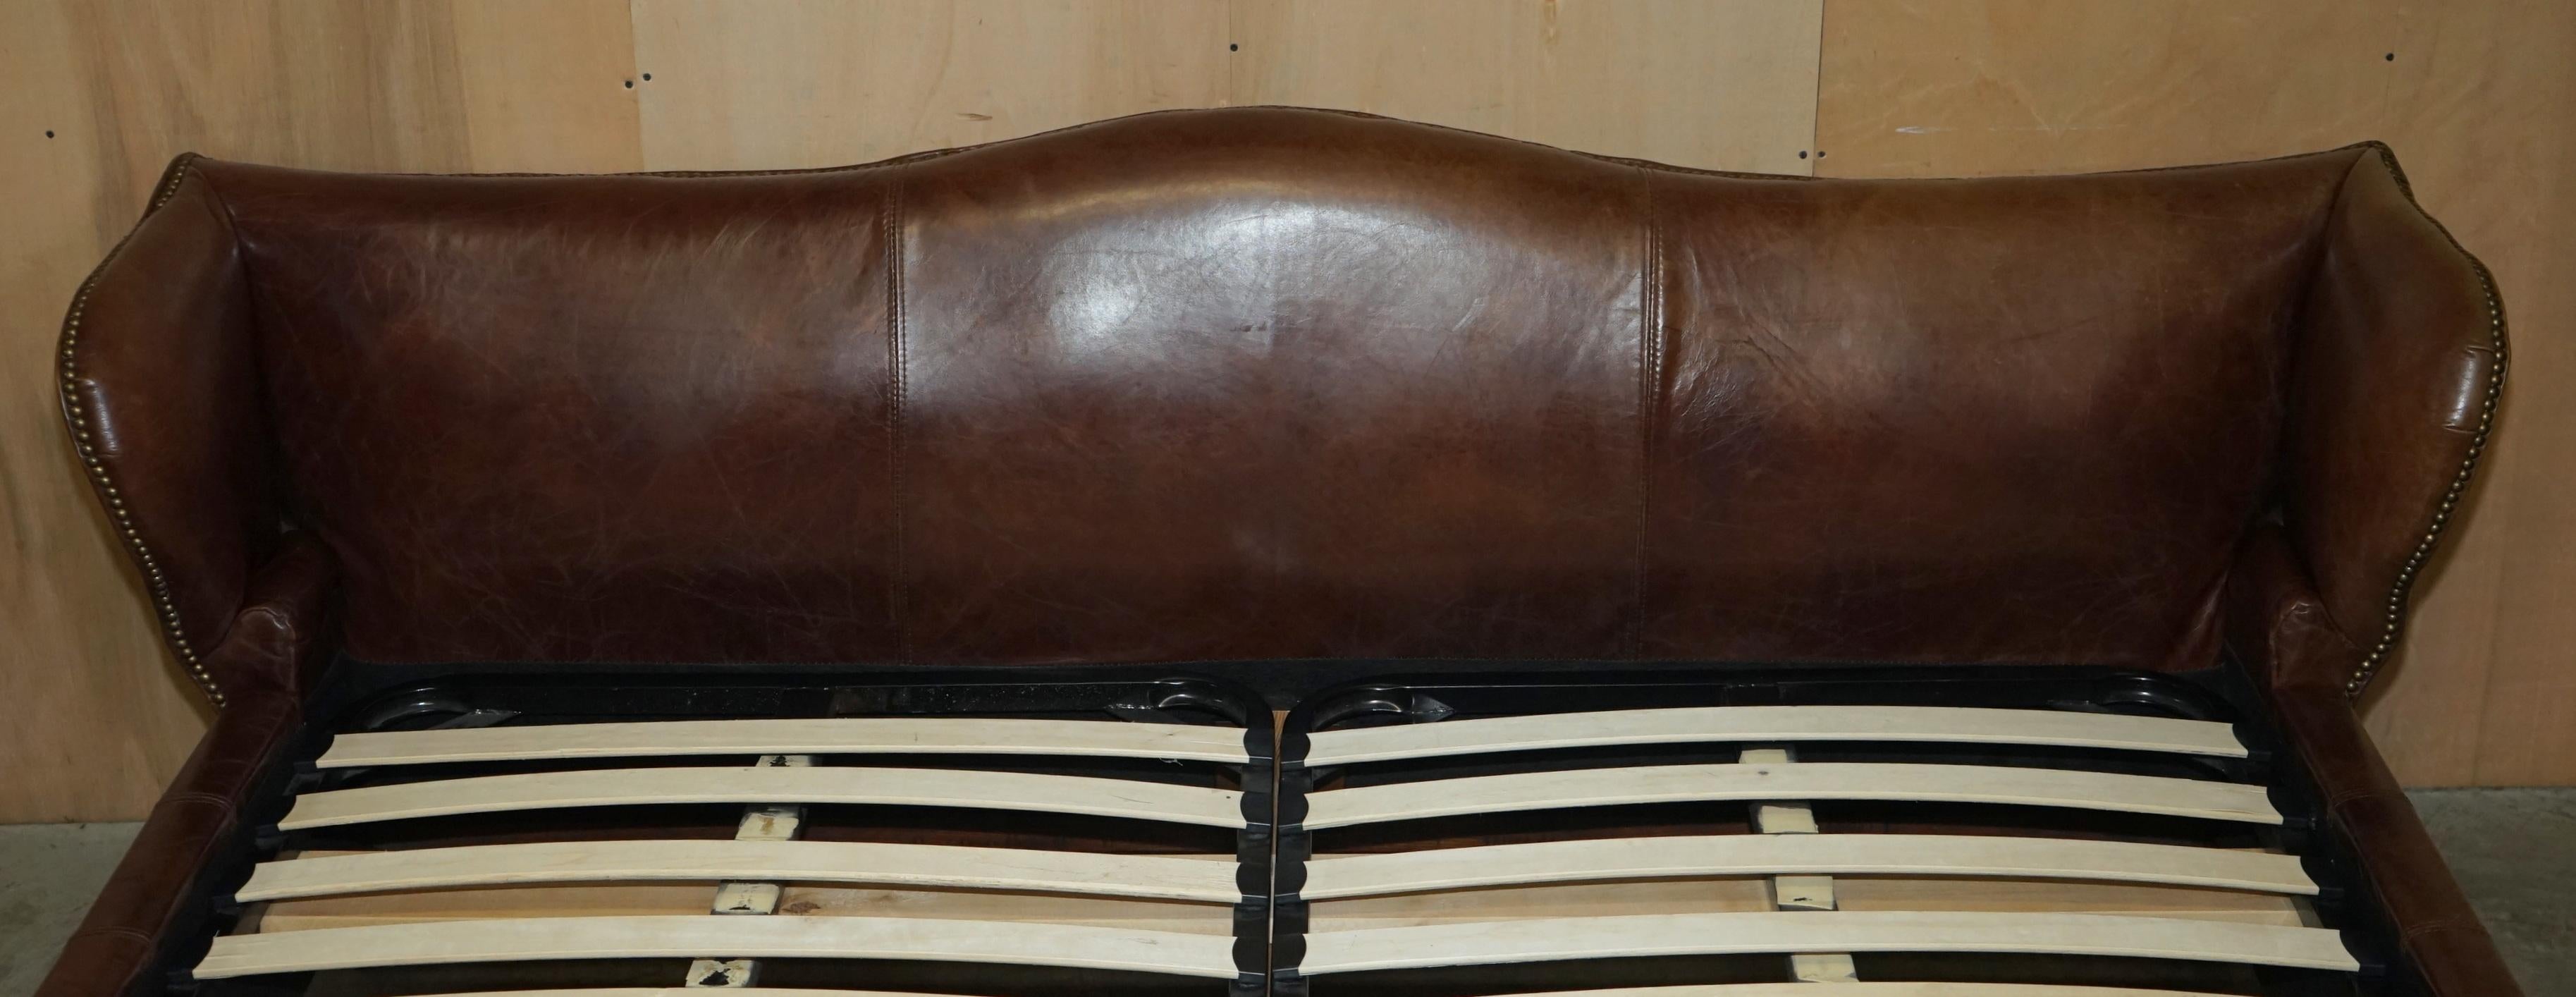 VERY RARE HUGE HAND DYED BROWN LEATHER WiNGBACK SUPER KING SIZE BED FRAME For Sale 4